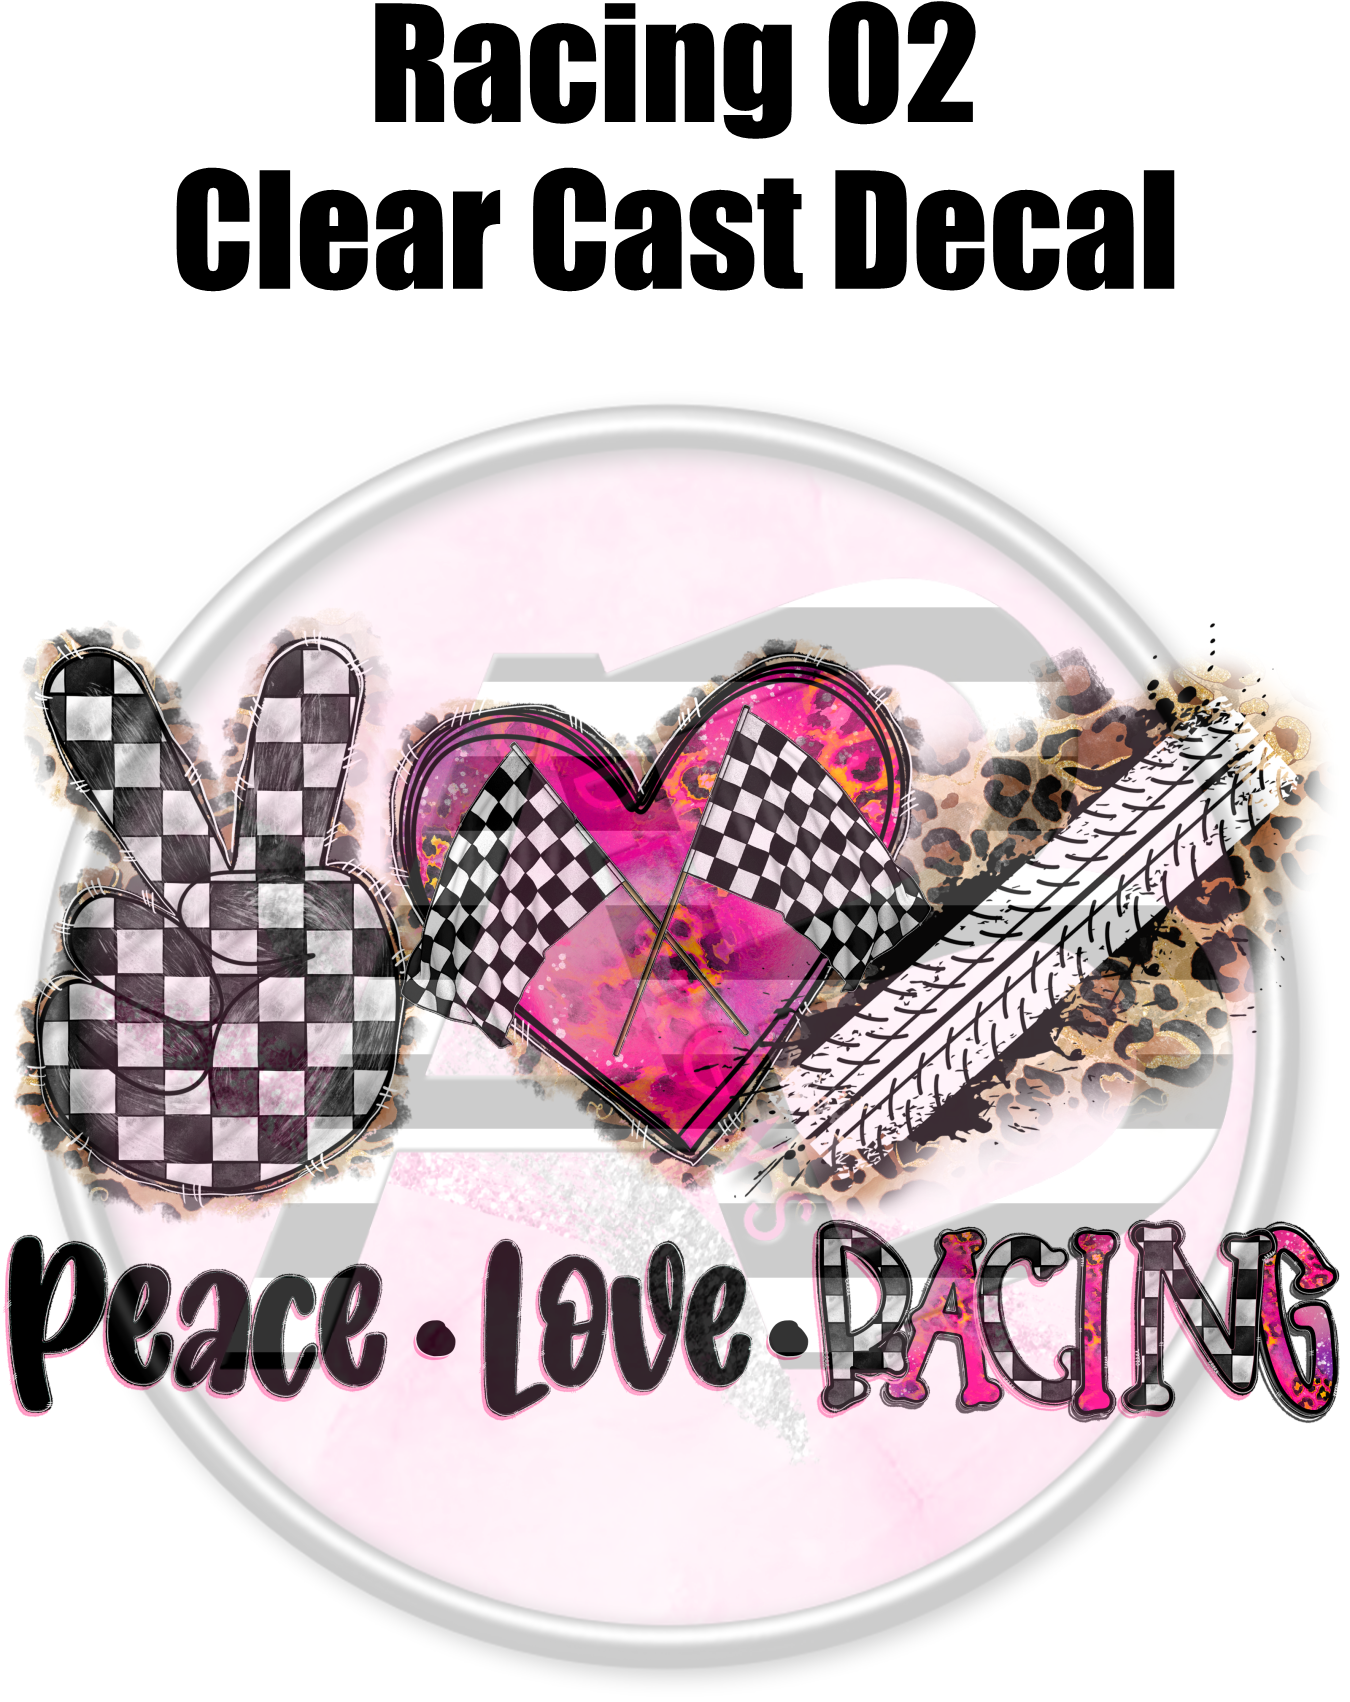 Racing 02 - Clear Cast Decal